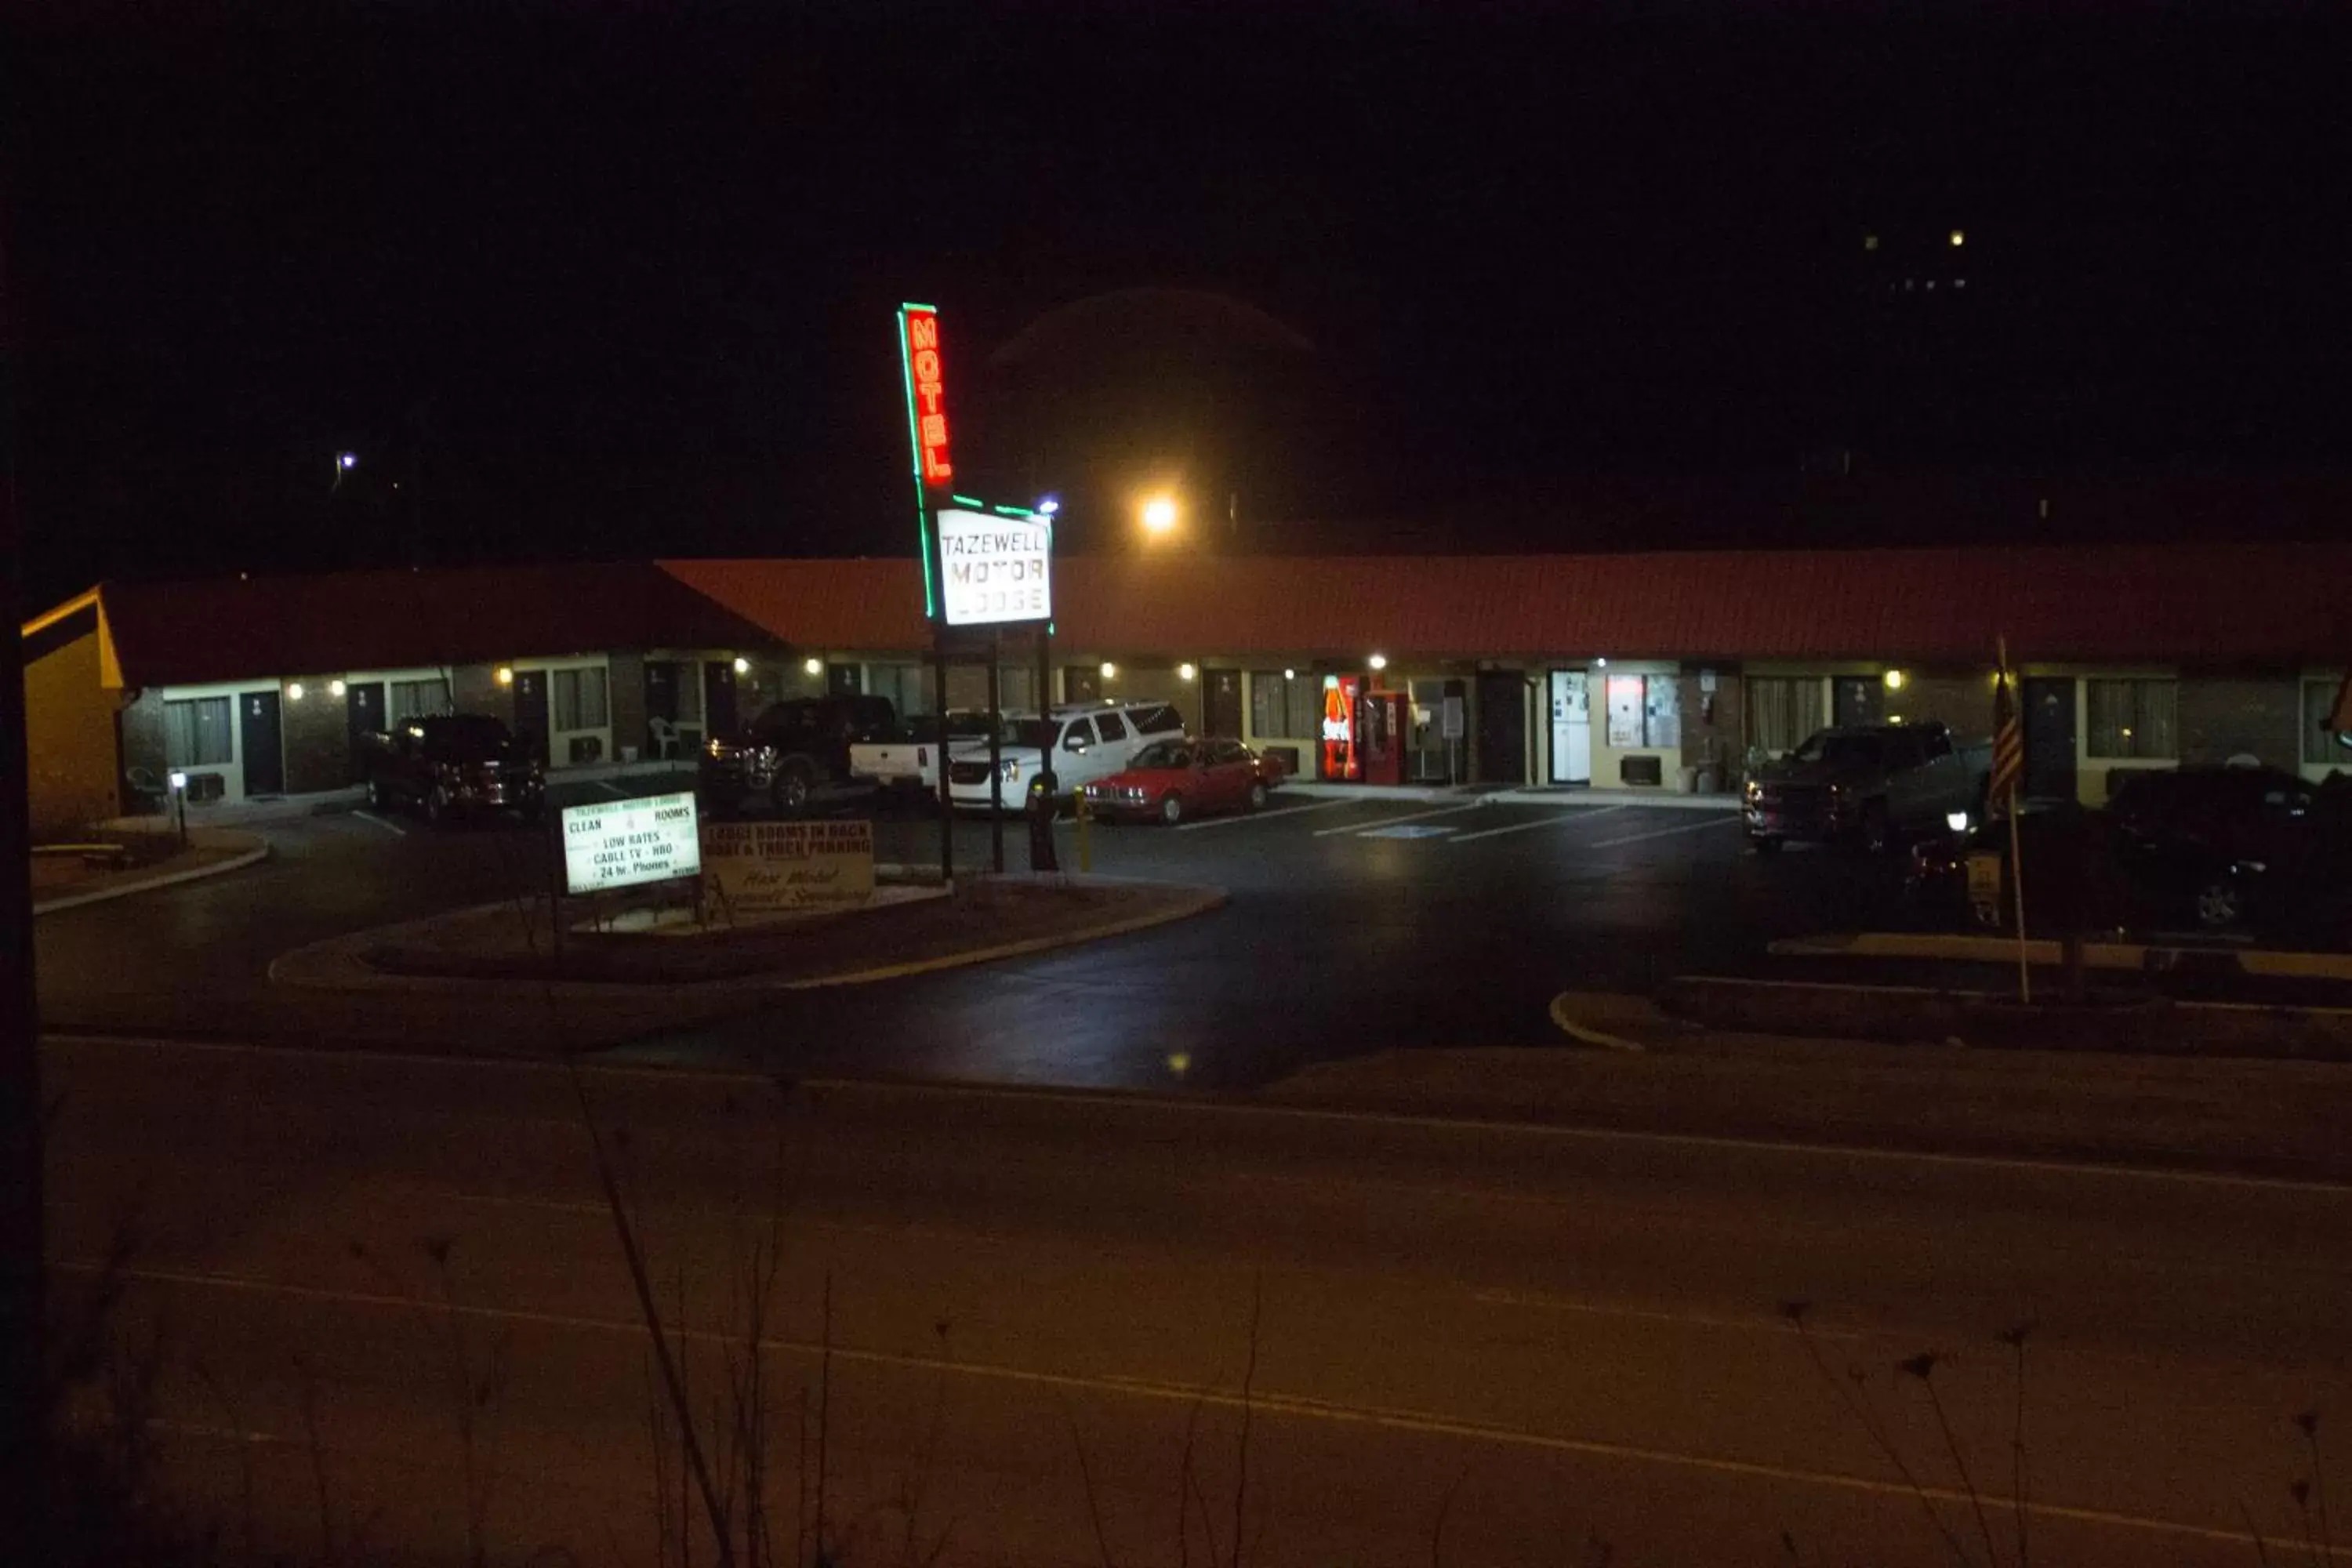 Street view in Tazewell Motor Lodge